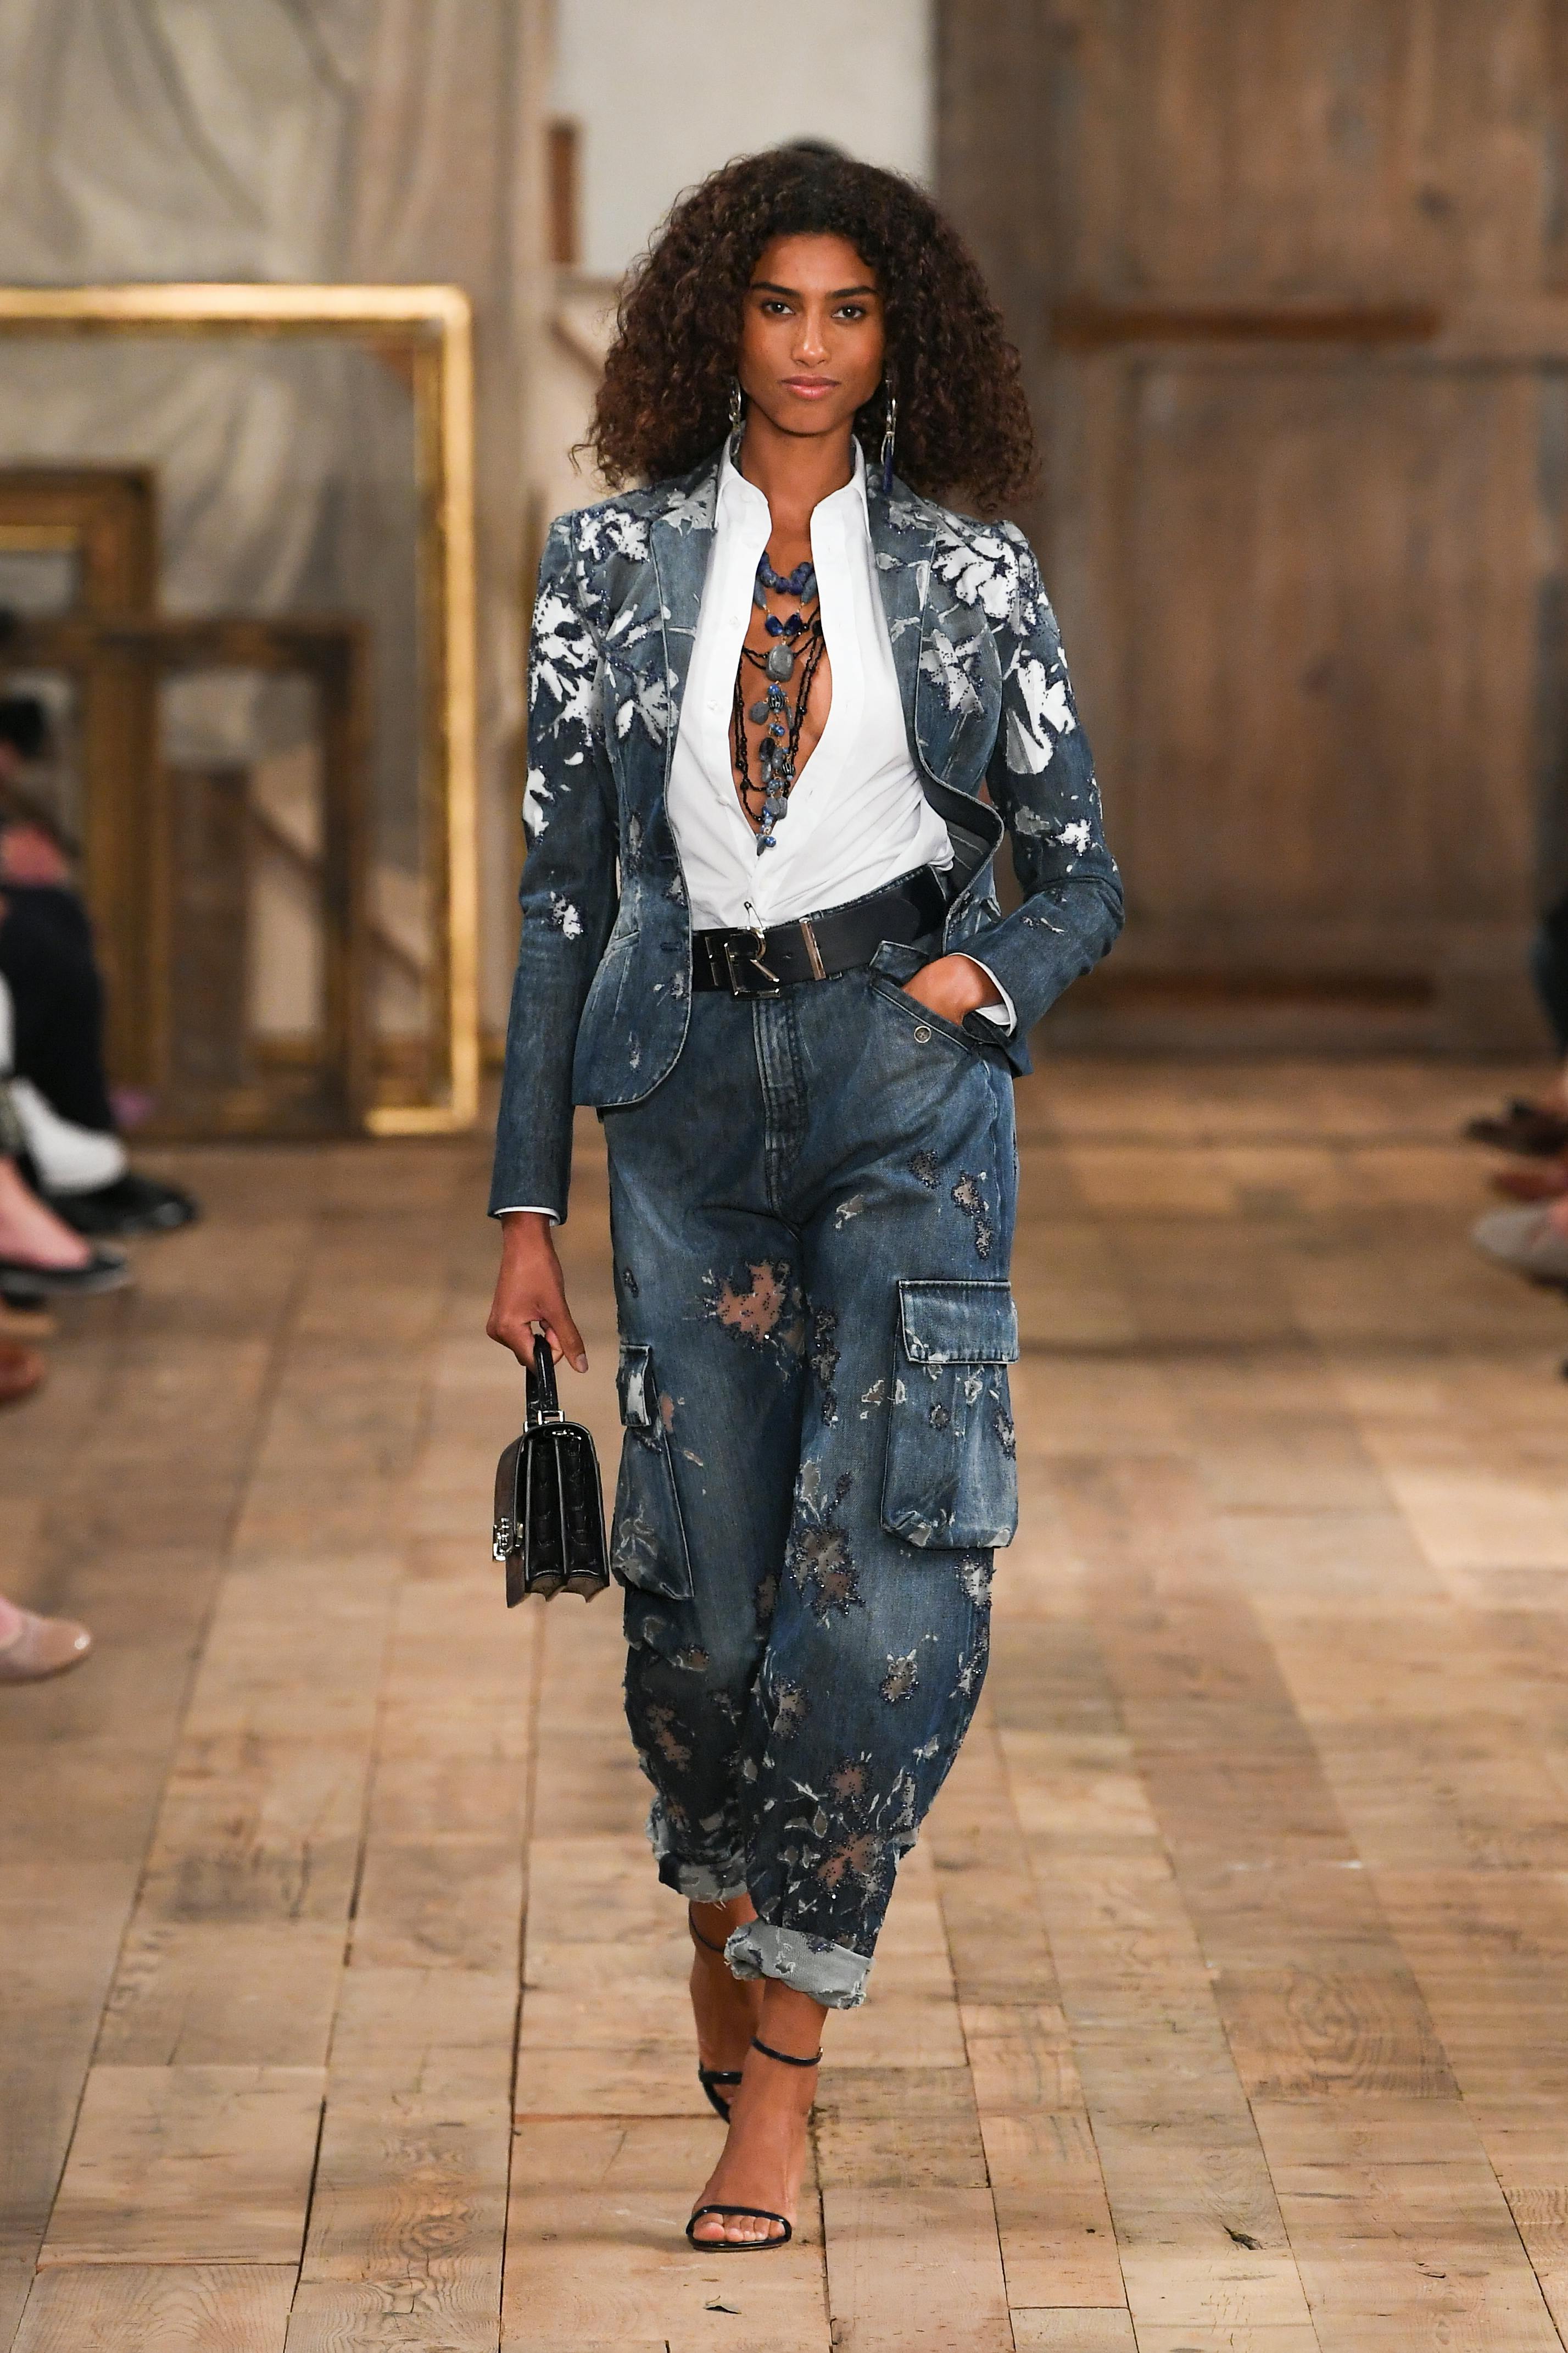 RalphLauren's Pre-Spring 2023 Collection is grounded in the